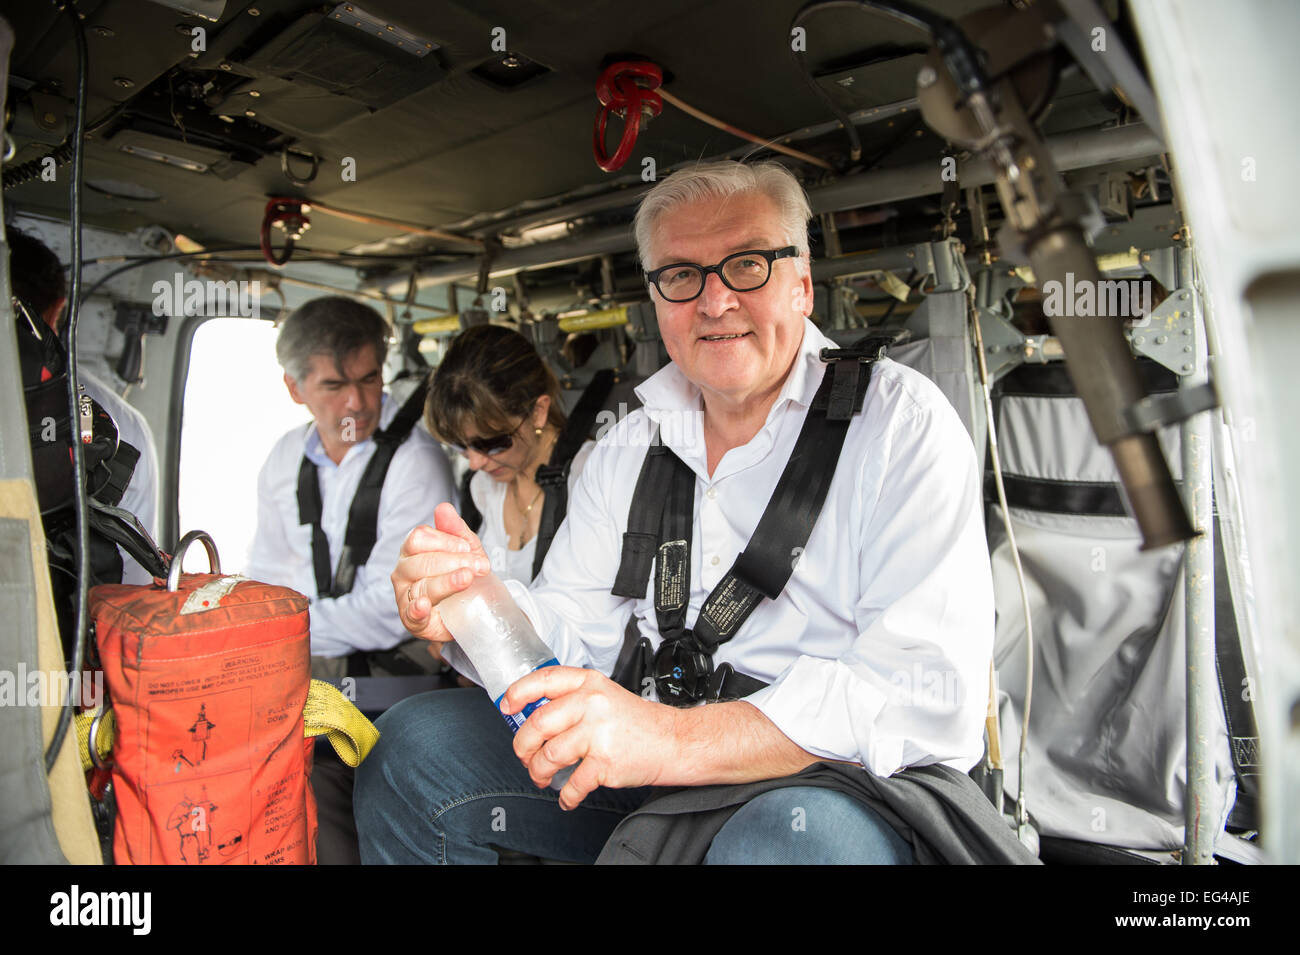 Santa Marta, Colombia. 15th Feb, 2015. German Foreign Minister Frank-Walter Steinmeier (SPD, R) sits next to Colombian Minister of Justice Yesid Reyes Alvarado (l) and the Colombia'S Deputy Forein Minister Patti Londono Jaramillo (M) as they sit in a military helicopter o in Santa Marta, Colombia, 15 February 2015. Steinmeier was on his way to visit a coffee plantation and processing plant of the indigenous community of Kogis during his official visit to Colombia. Photo: Bernd Von Jutrczenka/dpa/Alamy Live News Stock Photo